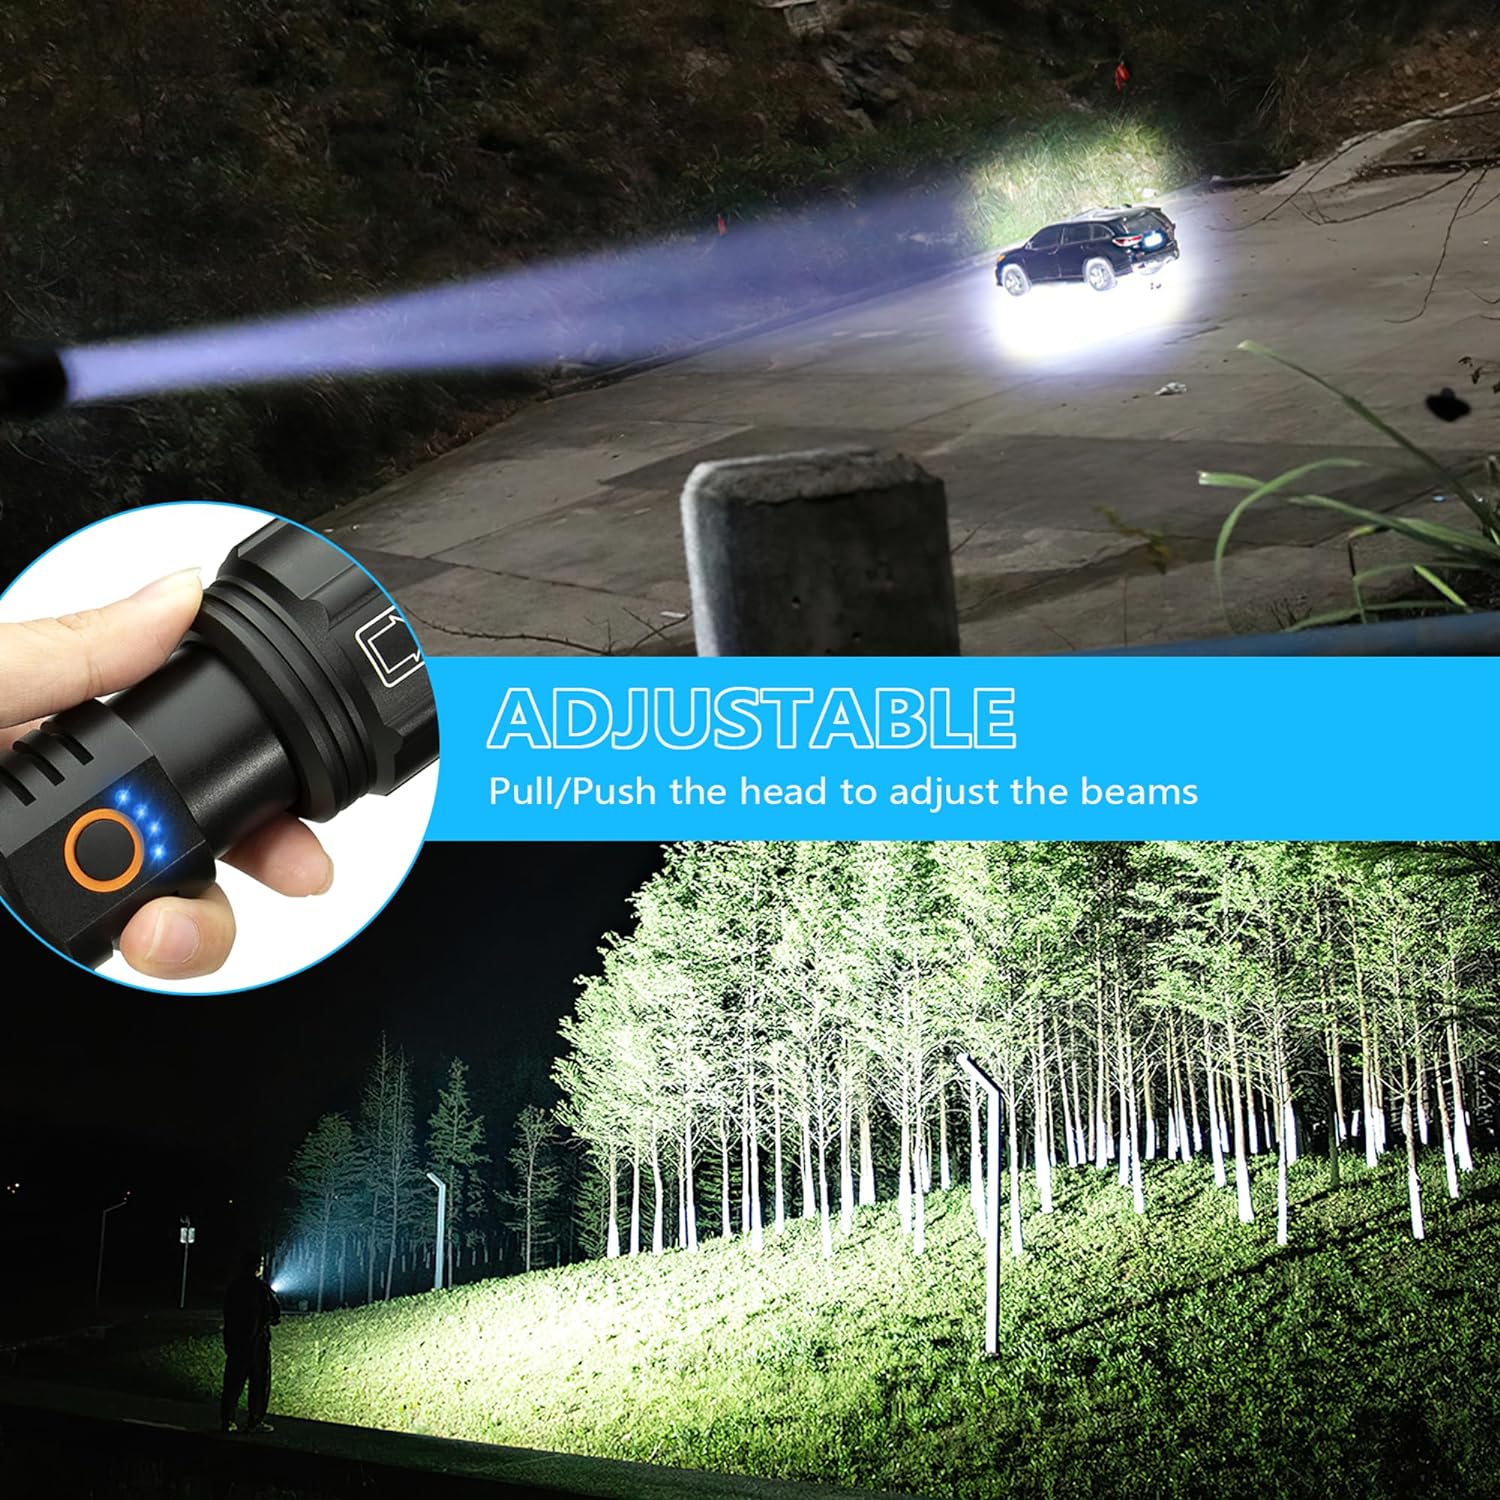 NiaoChao Flashlights High Lumens Rechargeable, 2 Pack Flash Light 900000 Lumen Super Bright Led Flashlight with ΒATTERY, 5 Modes, IPX6 Waterproof